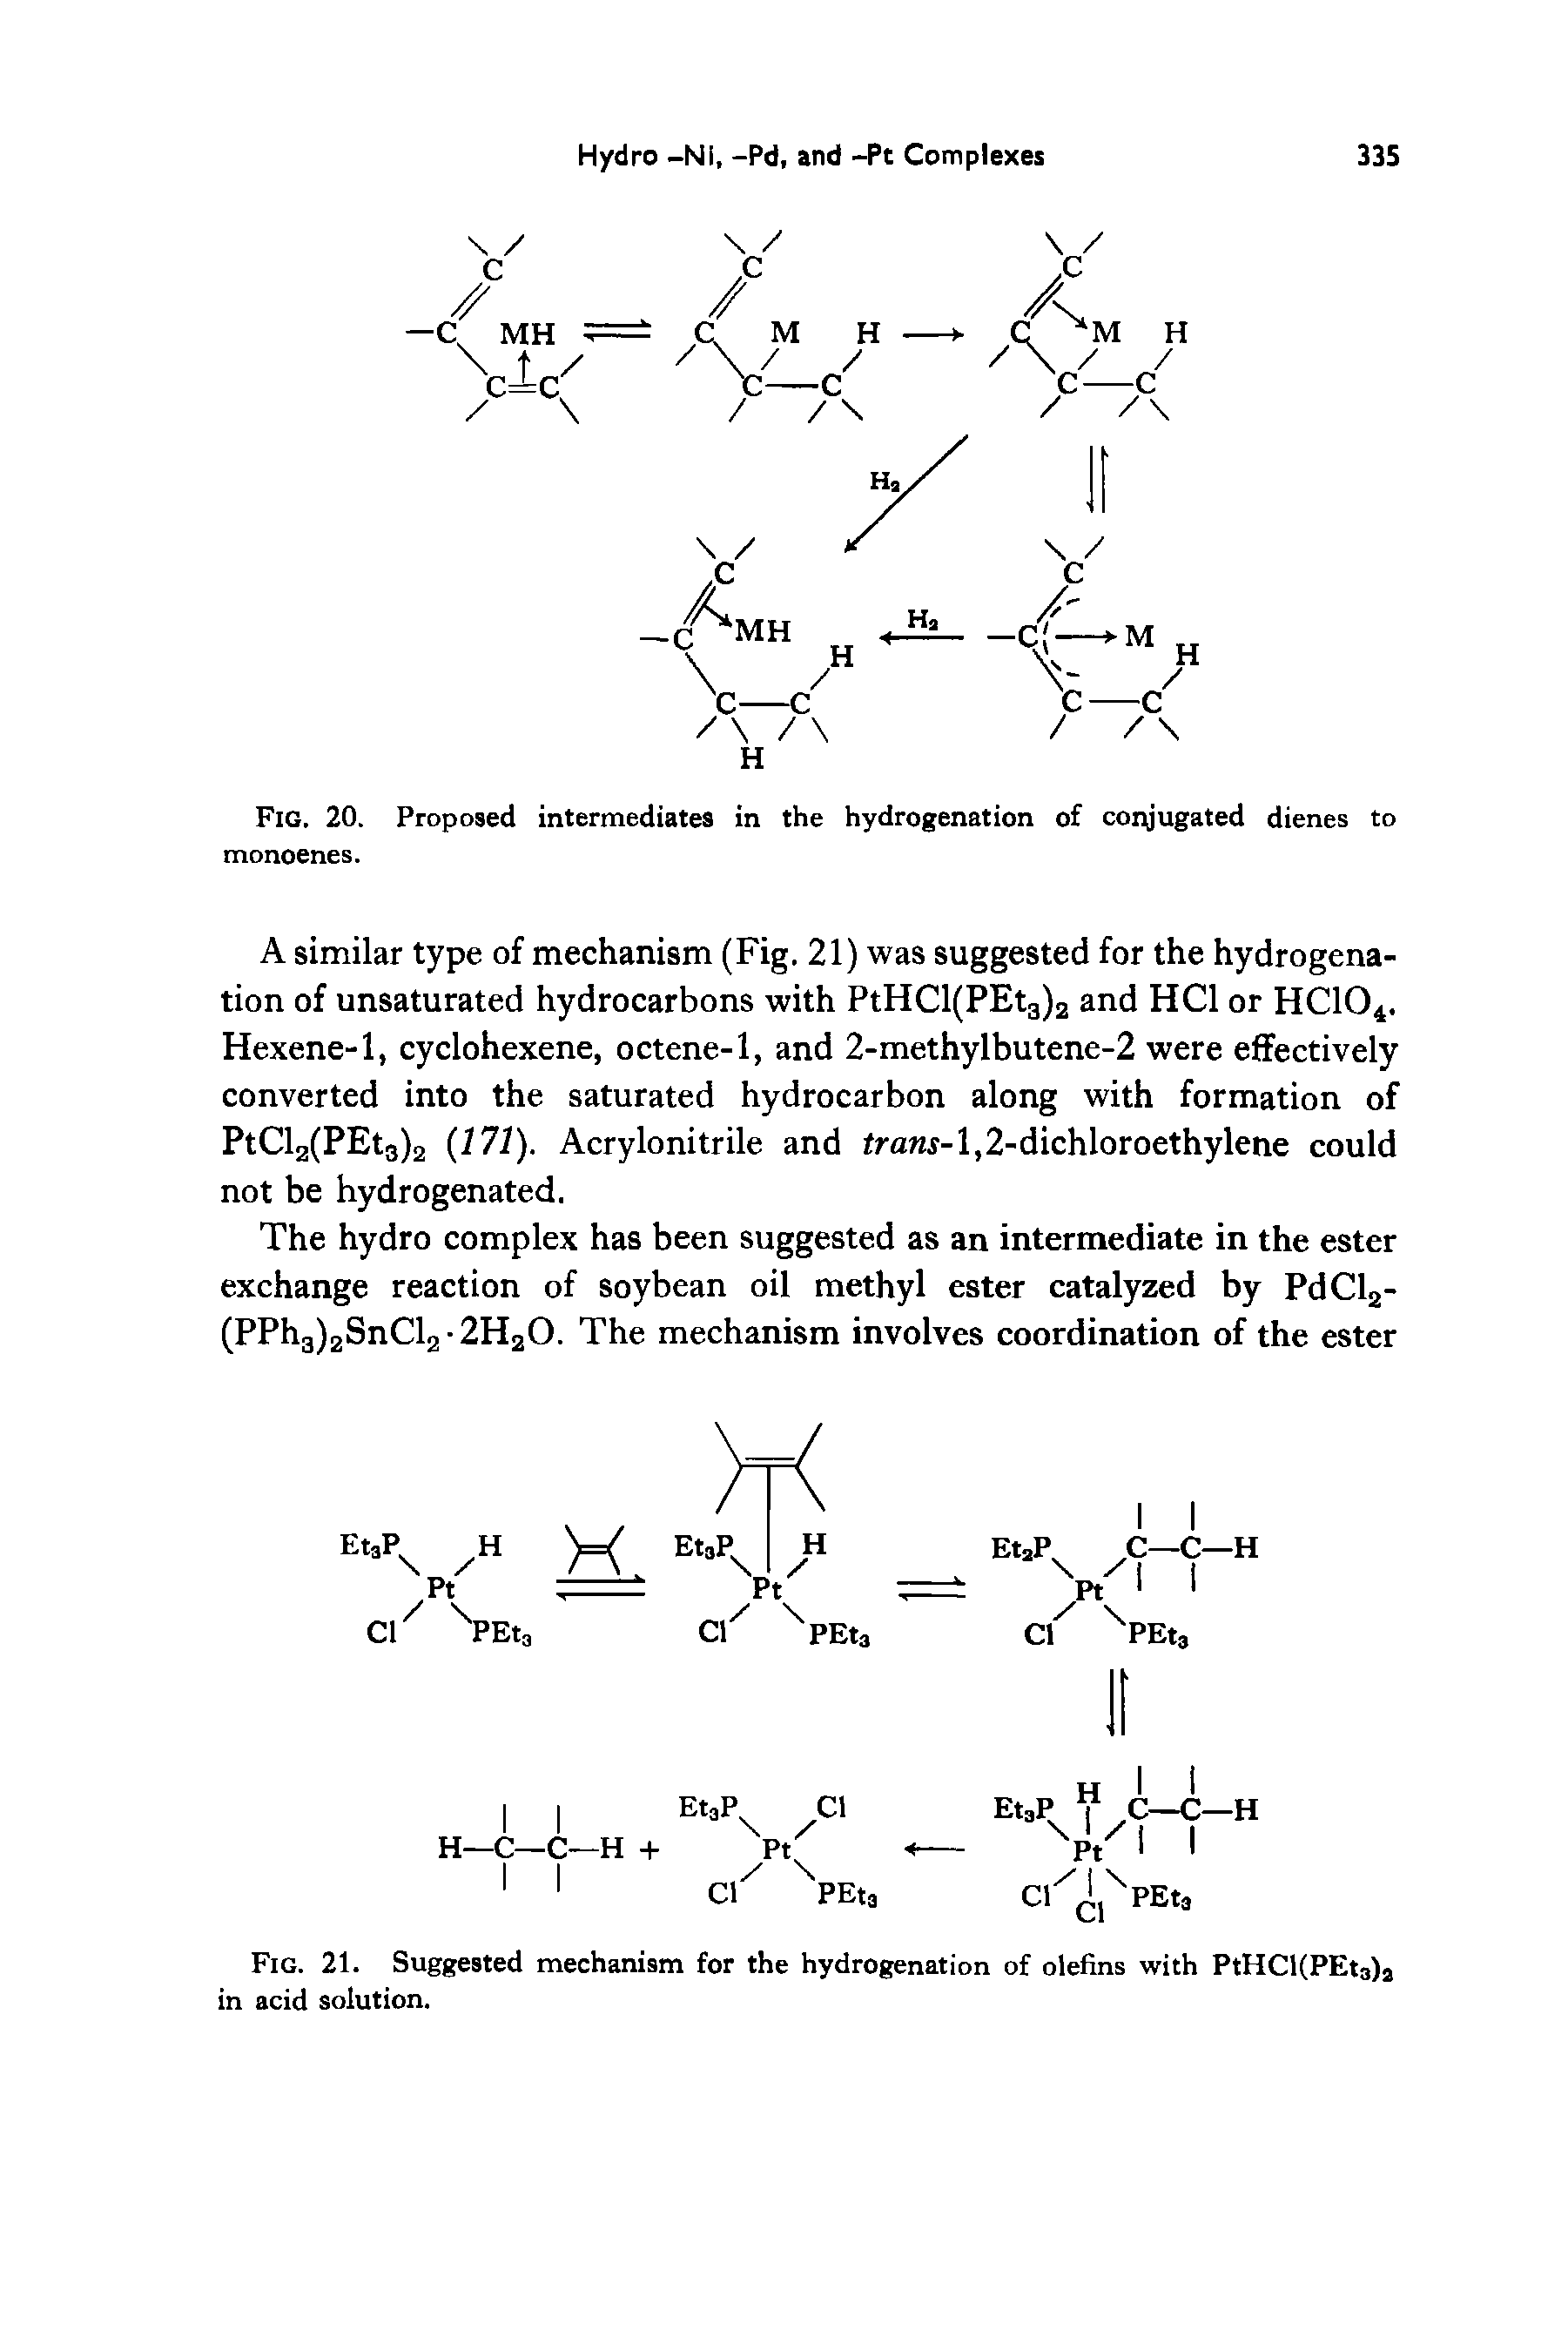 Fig. 20. Proposed intermediates in the hydrogenation of conjugated dienes to monoenes.